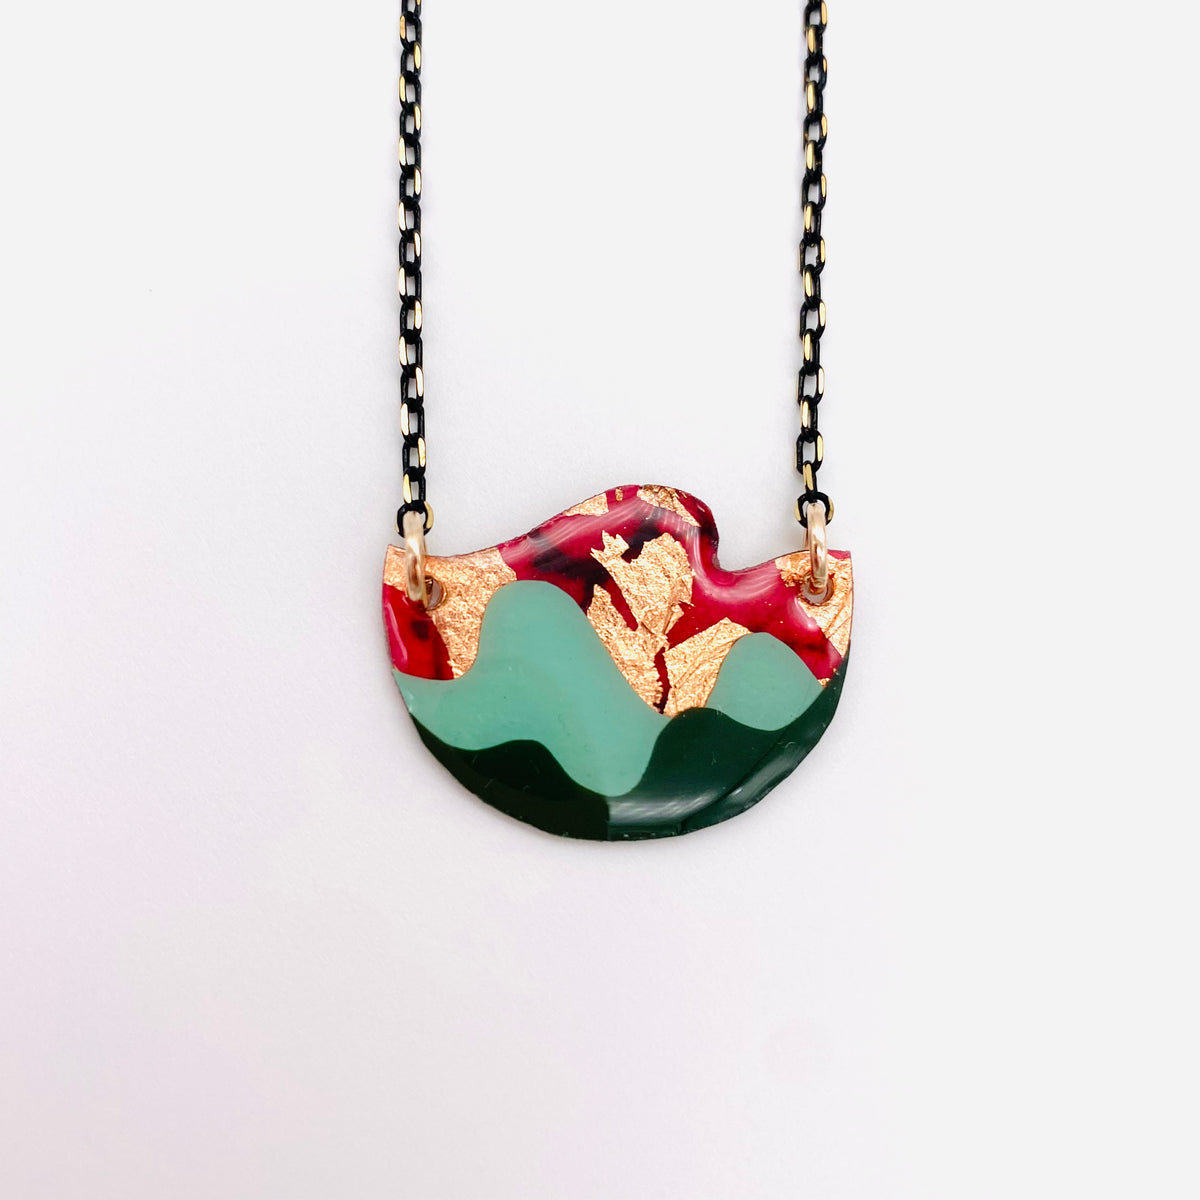 Tonn sgraffito necklace in red/olive/mint/rose-gold